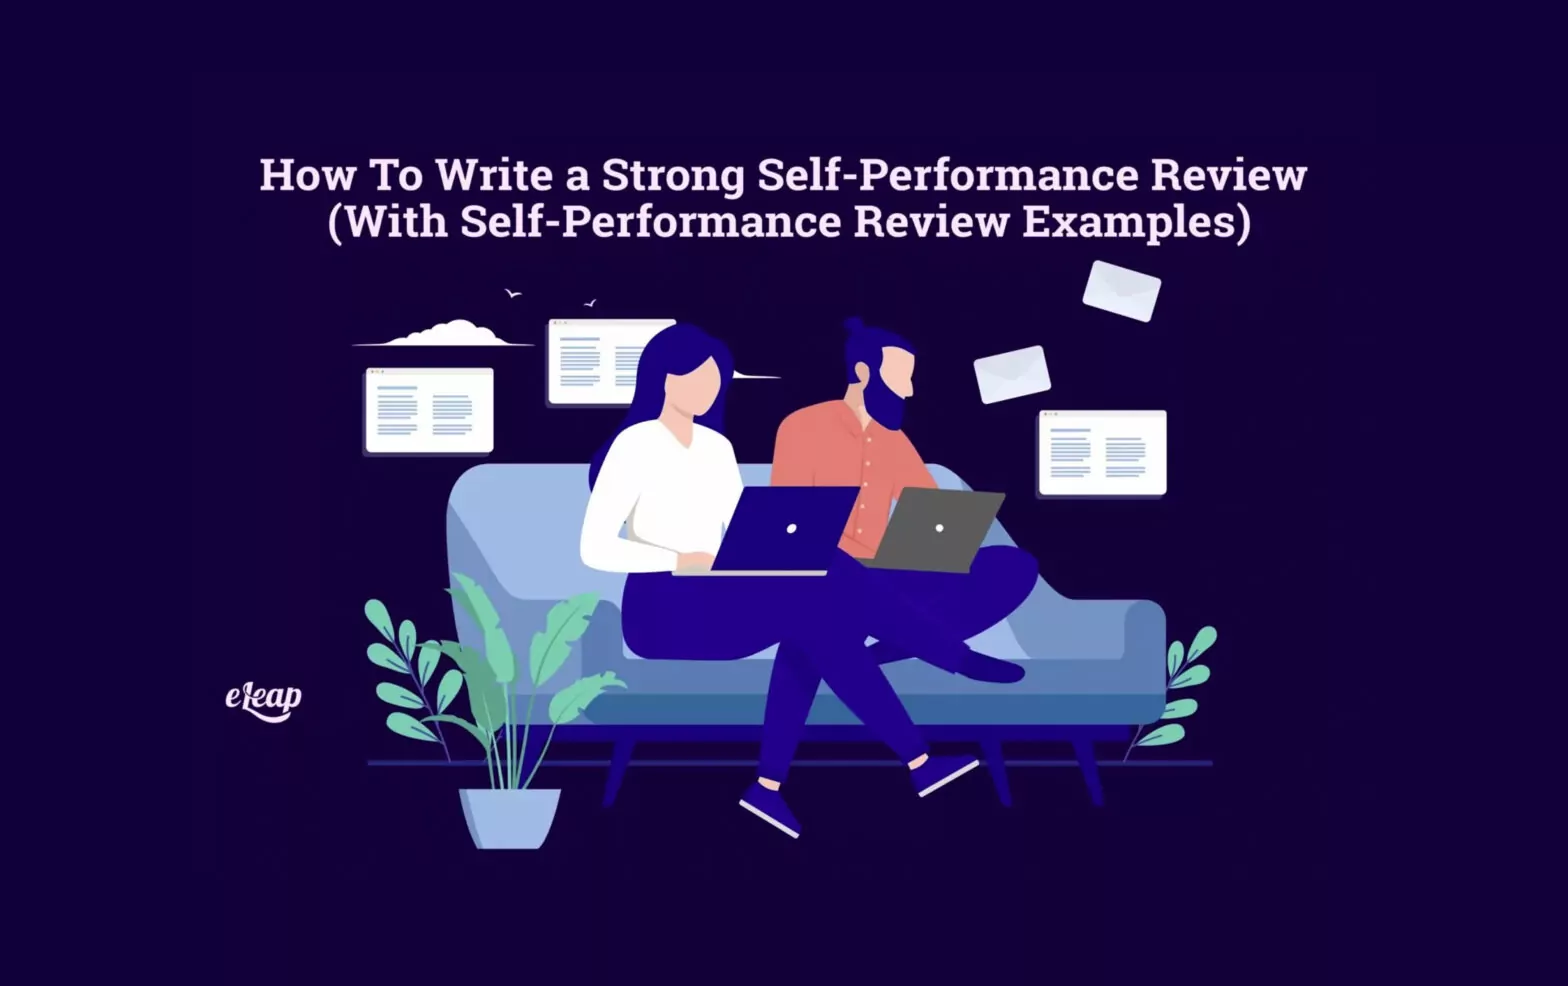 How To Write a Strong Self-Performance Review (With Self-Performance Review Examples)